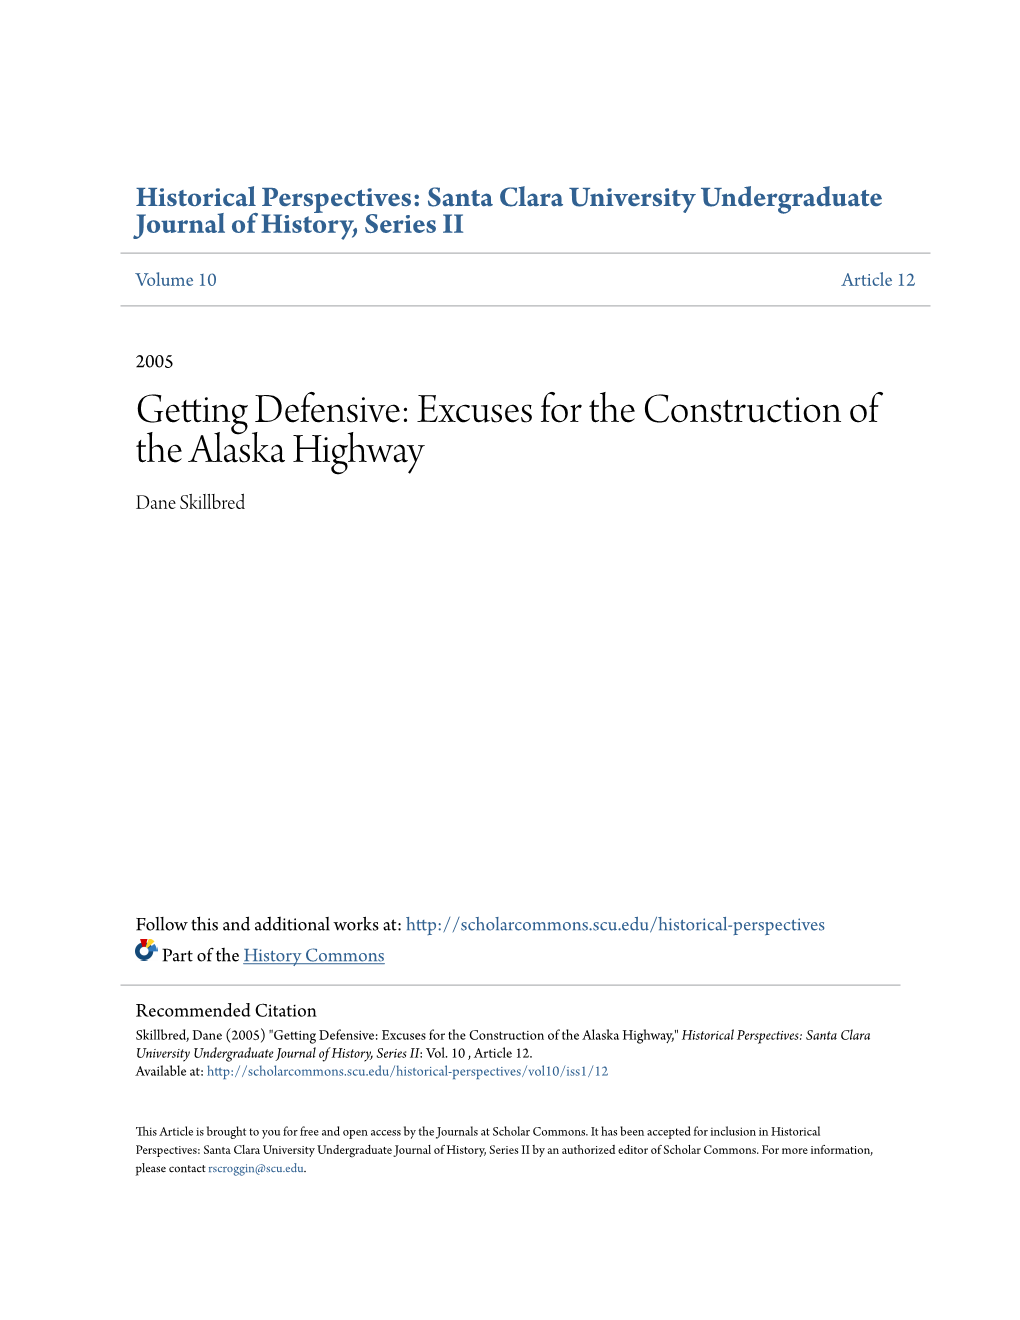 Excuses for the Construction of the Alaska Highway Dane Skillbred